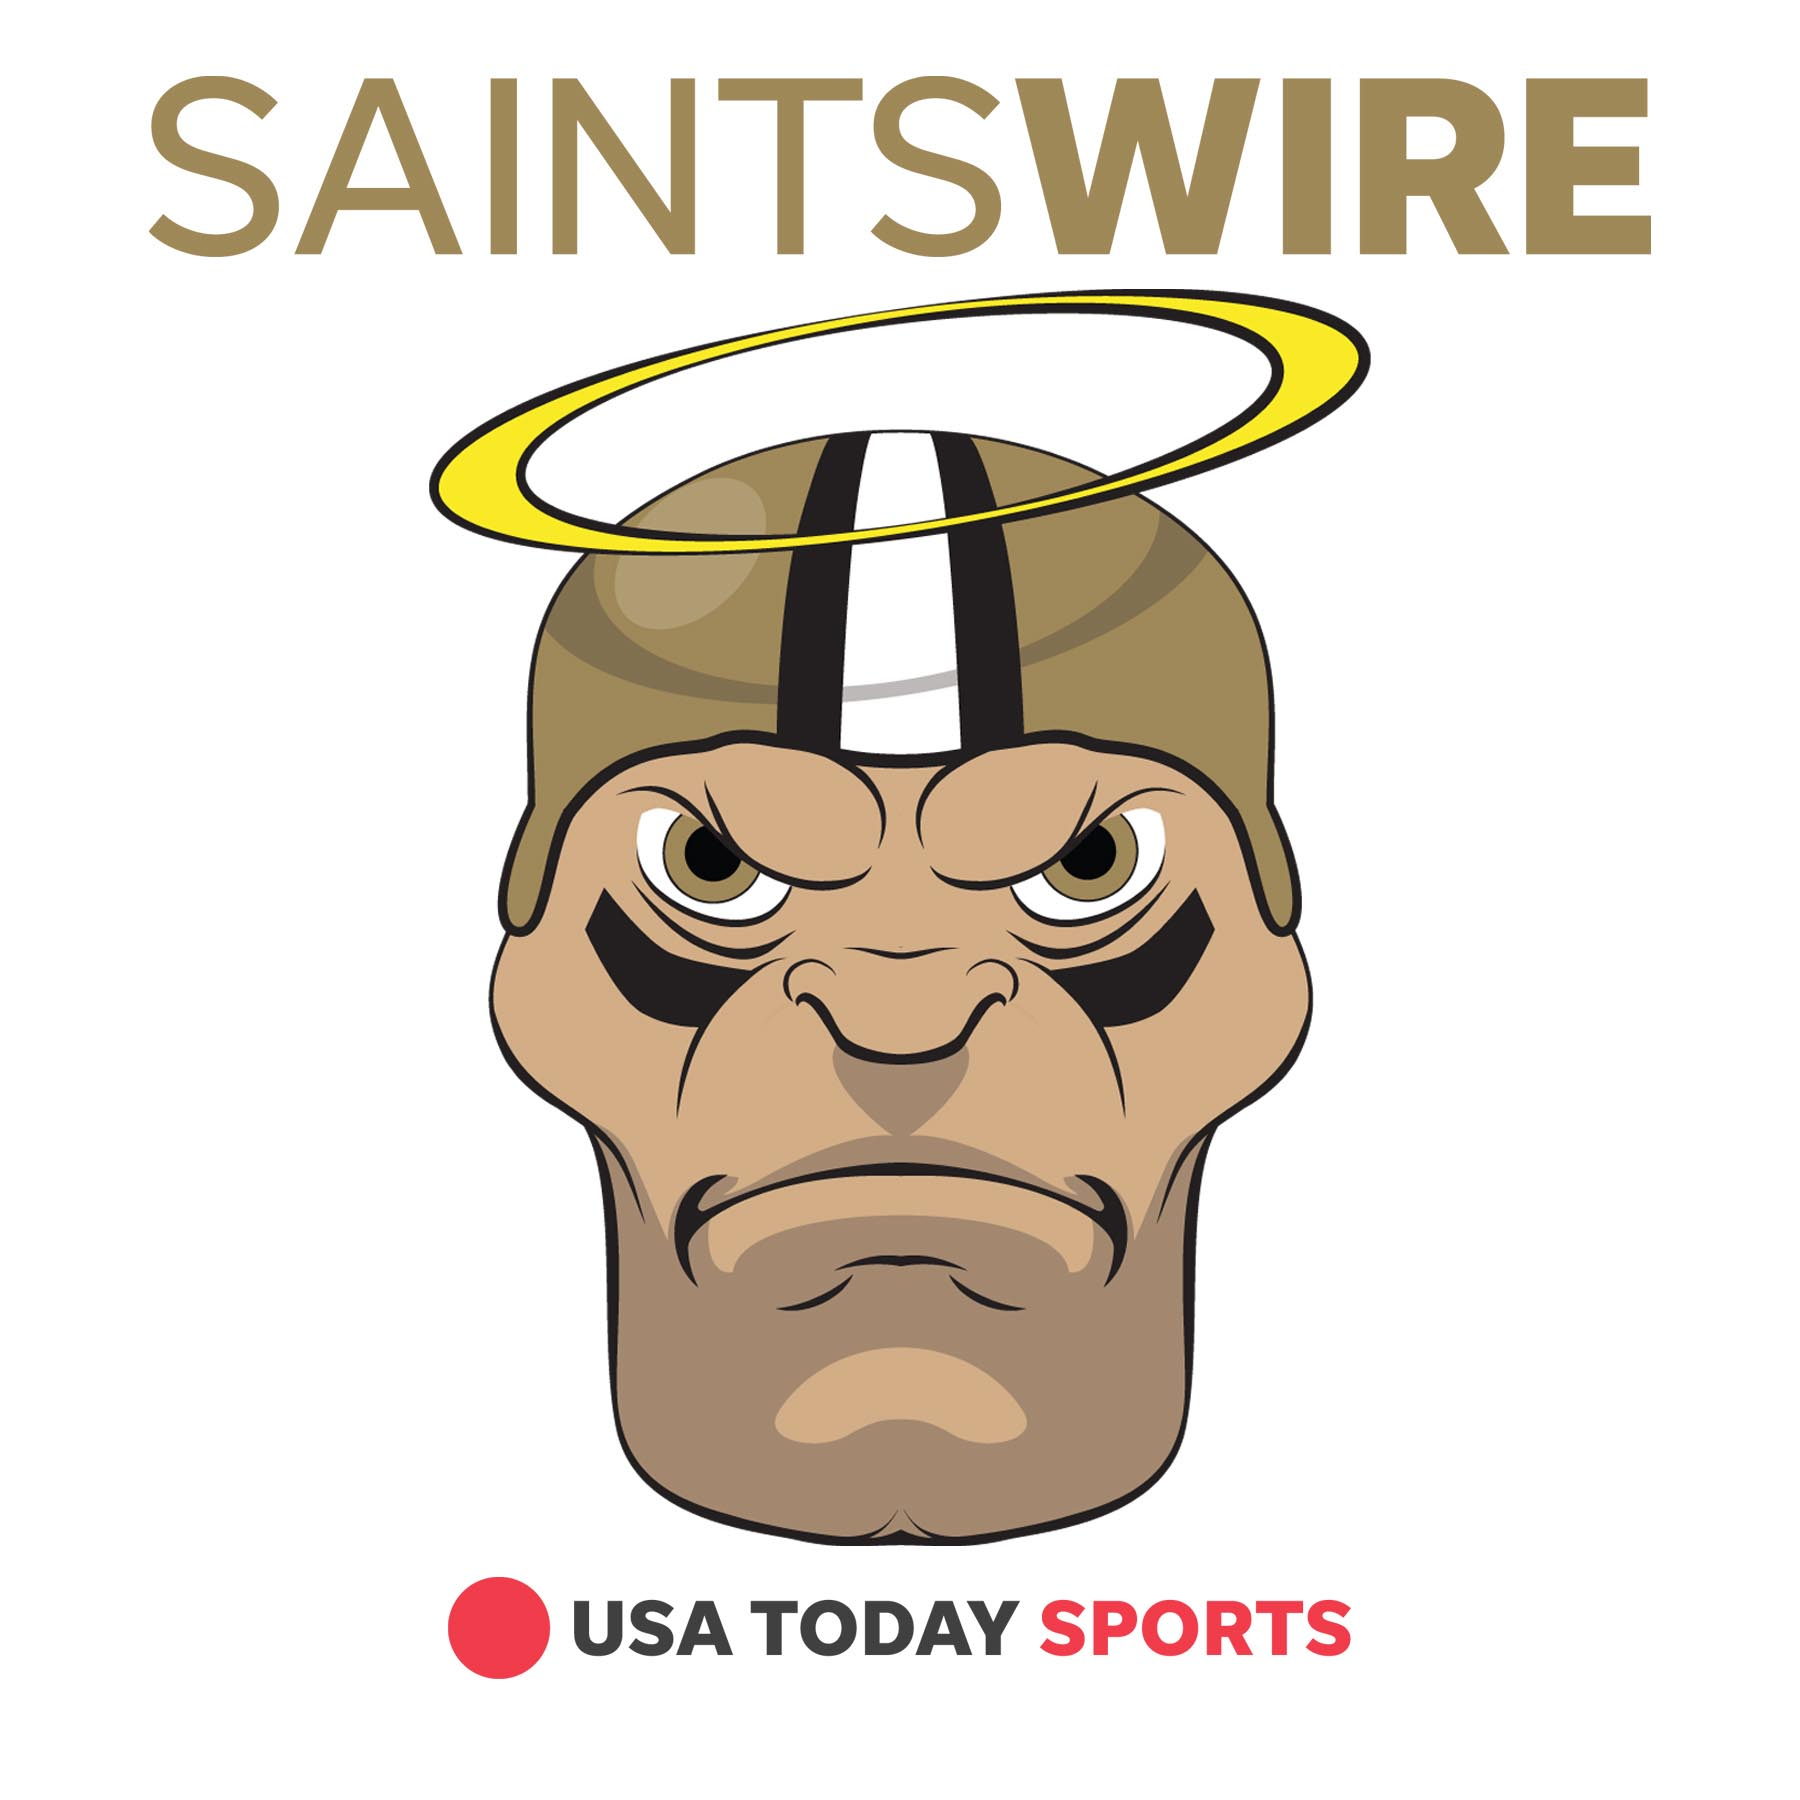 Flowers for Pete Carmichael // Alvin Kamara TD record // Saints-Texans preview with predictions